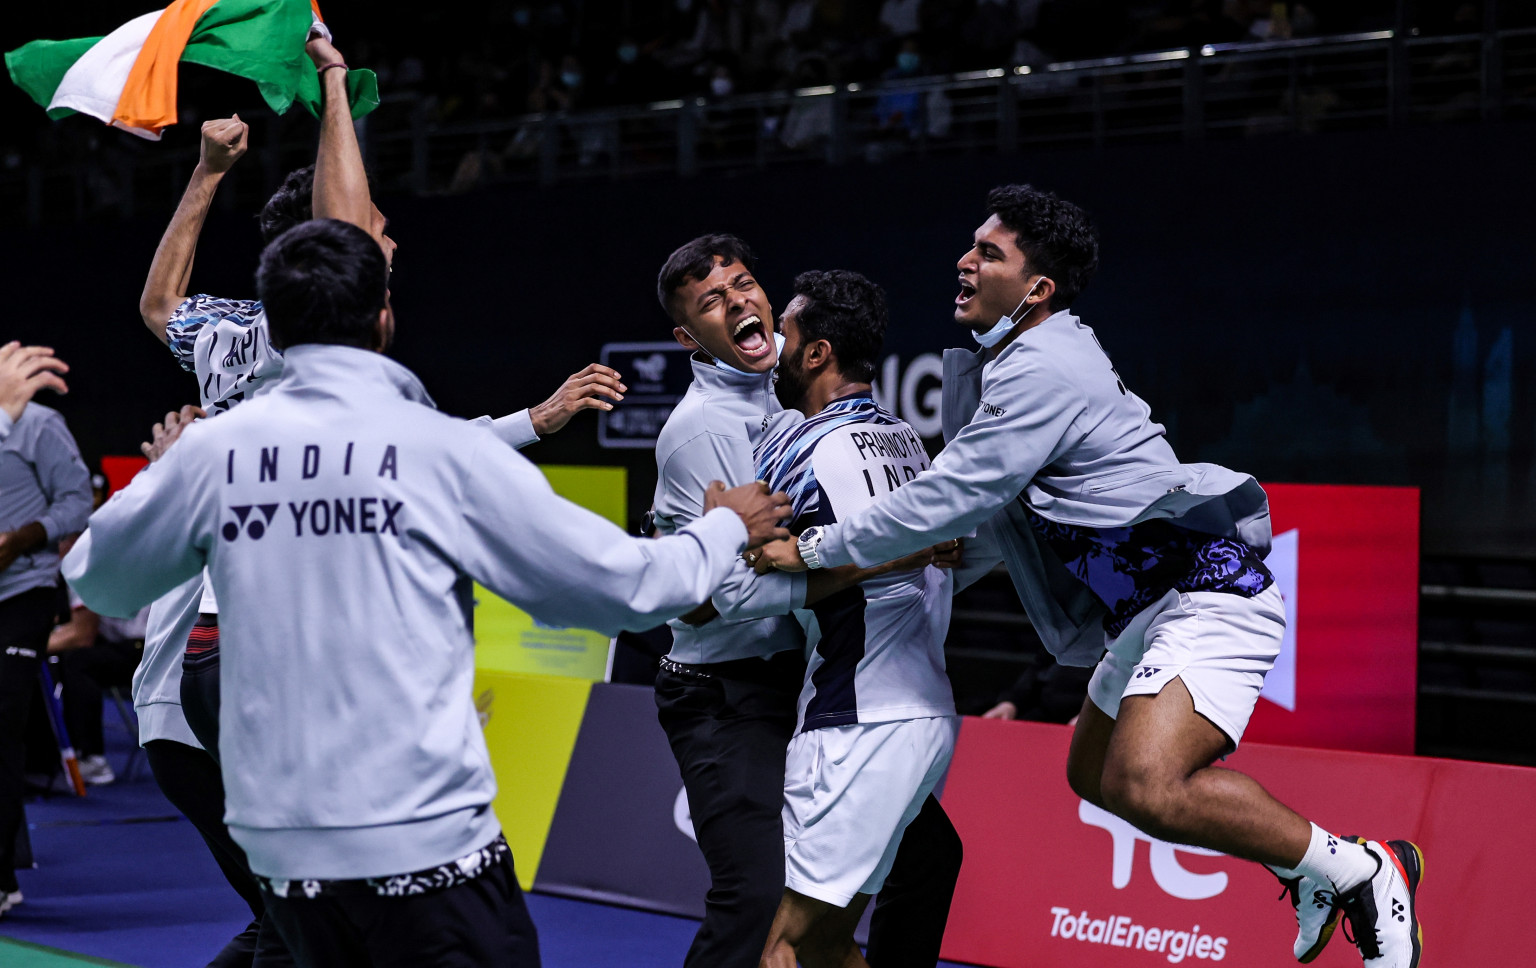 Thomas Cup Quarterfinals LIVE India SCRIPT HISTORY, beat five-time champion Malaysia to reach Thomas Cup SEMIFINALS after 43 years